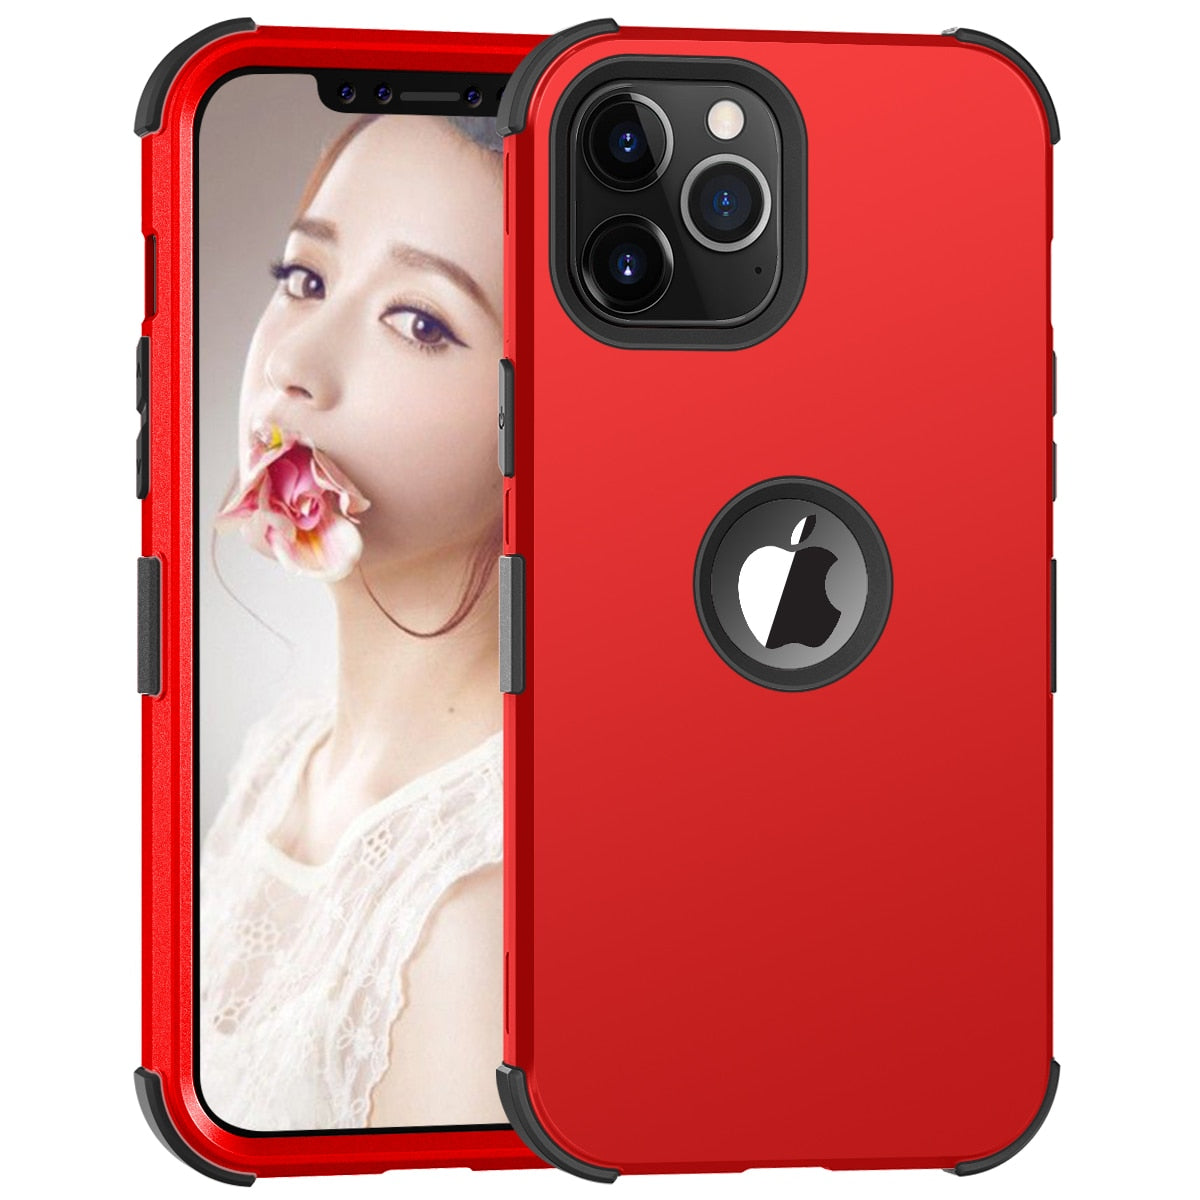 Shockproof 2 in 1 Case for iPhone 12 Shield Hybrid Hard PC + Soft TPU Case for iPhone 12 Pro Max Dual Layer Back Cover - 380230 for iPhone 12 Mini / Red / United States Find Epic Store